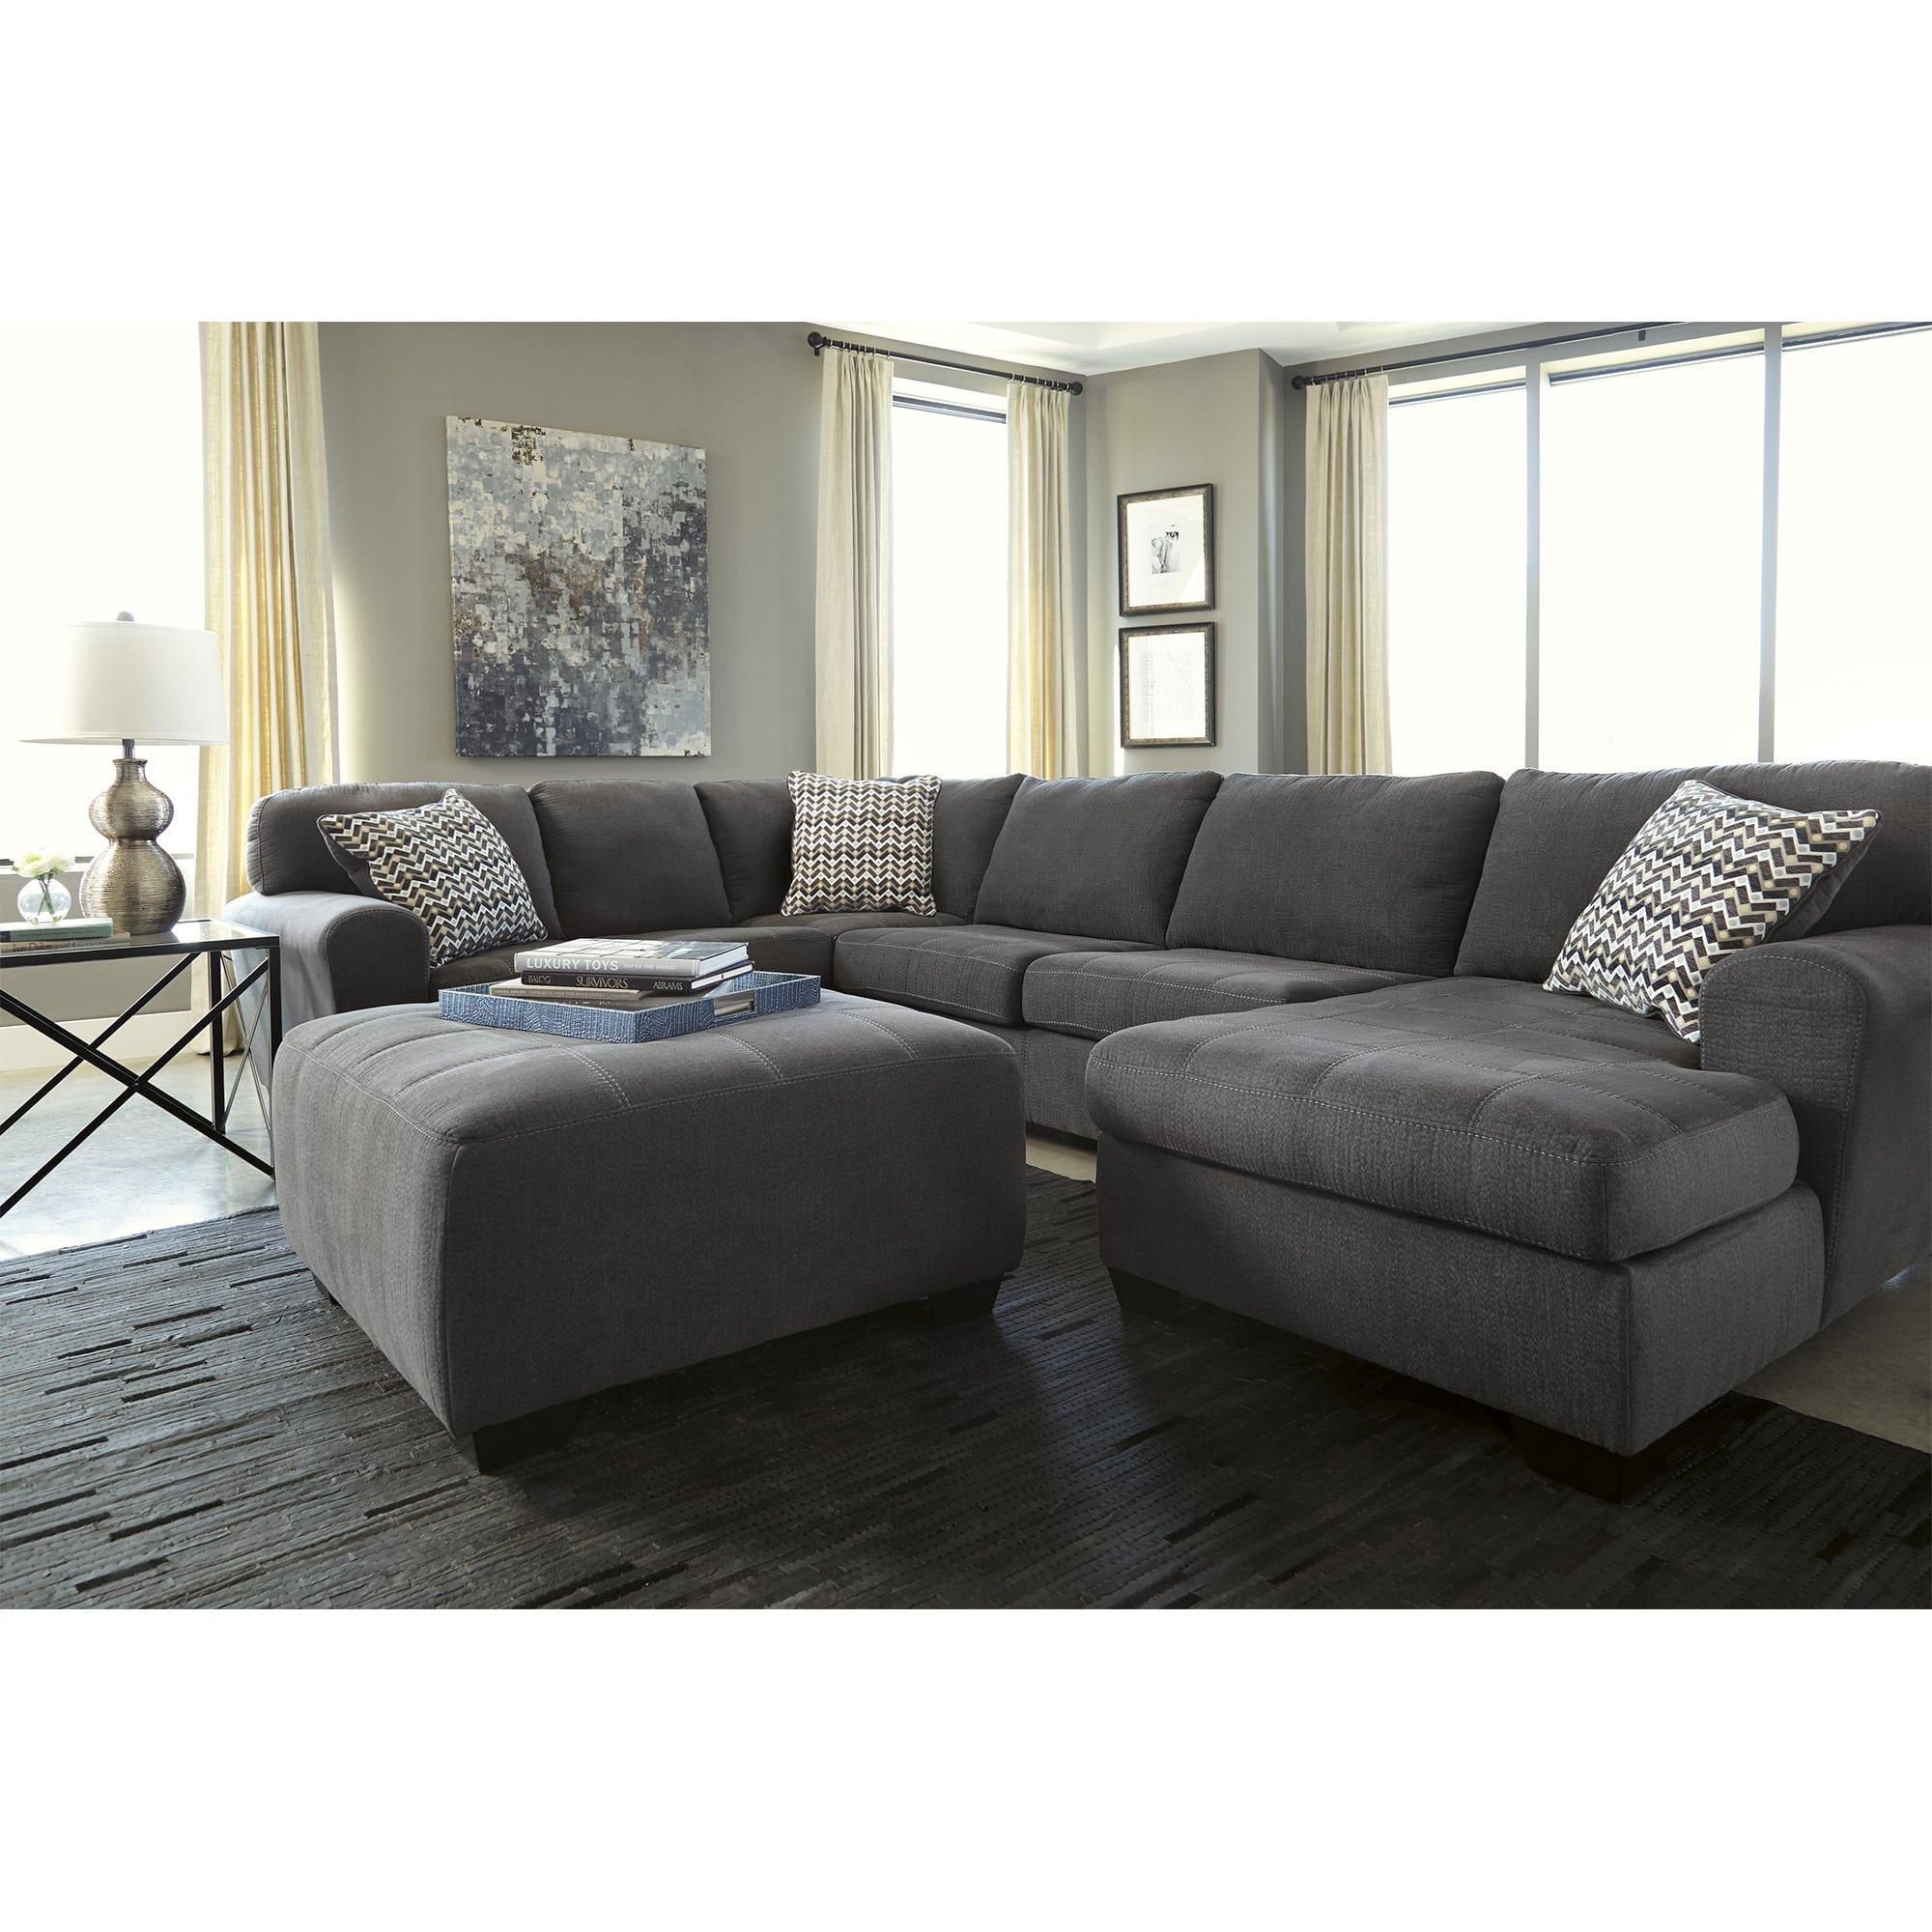 Rent To Own Ashley 4 Piece Sorenton Sectional Living Room Collection At Aarons Today